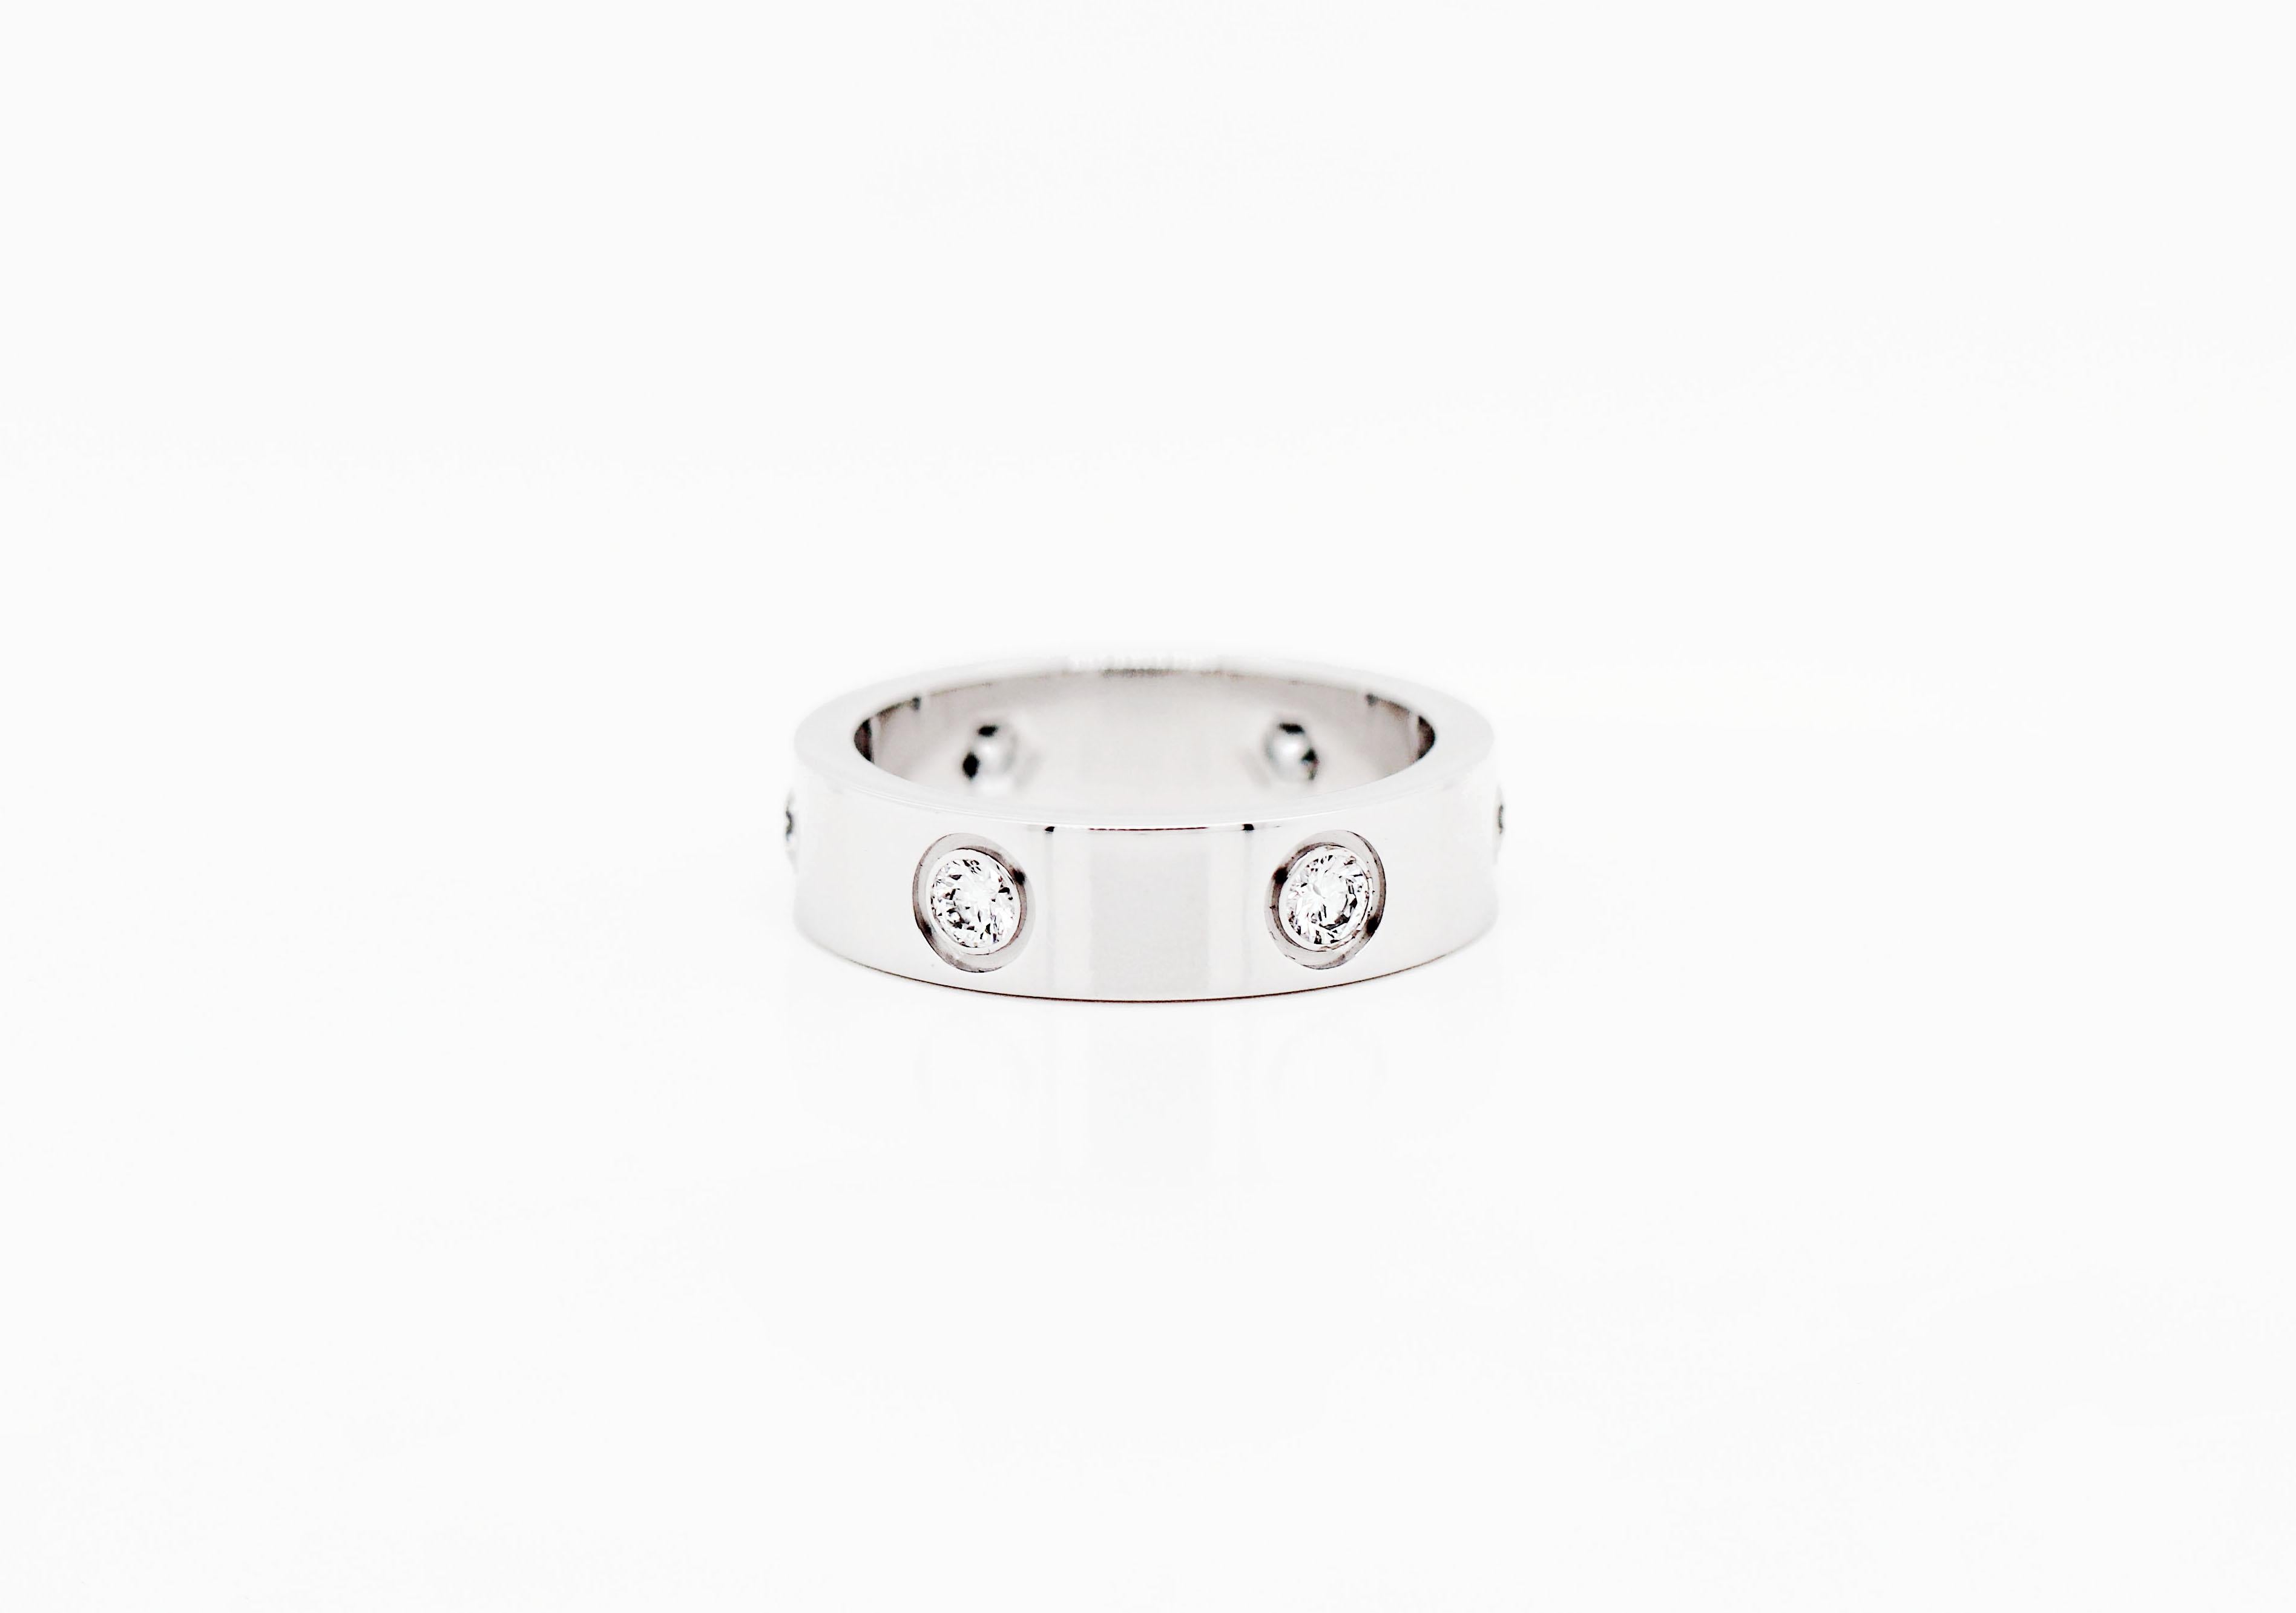 Cartier Love ring set with 6 round brilliant cut diamonds in rub over settings, mounted in an 18ct white gold band. The ring is engraved with the Cartier signature, 750, (size) 54, NT0400. UK finger size 'N'.

Comes with original Cartier box.